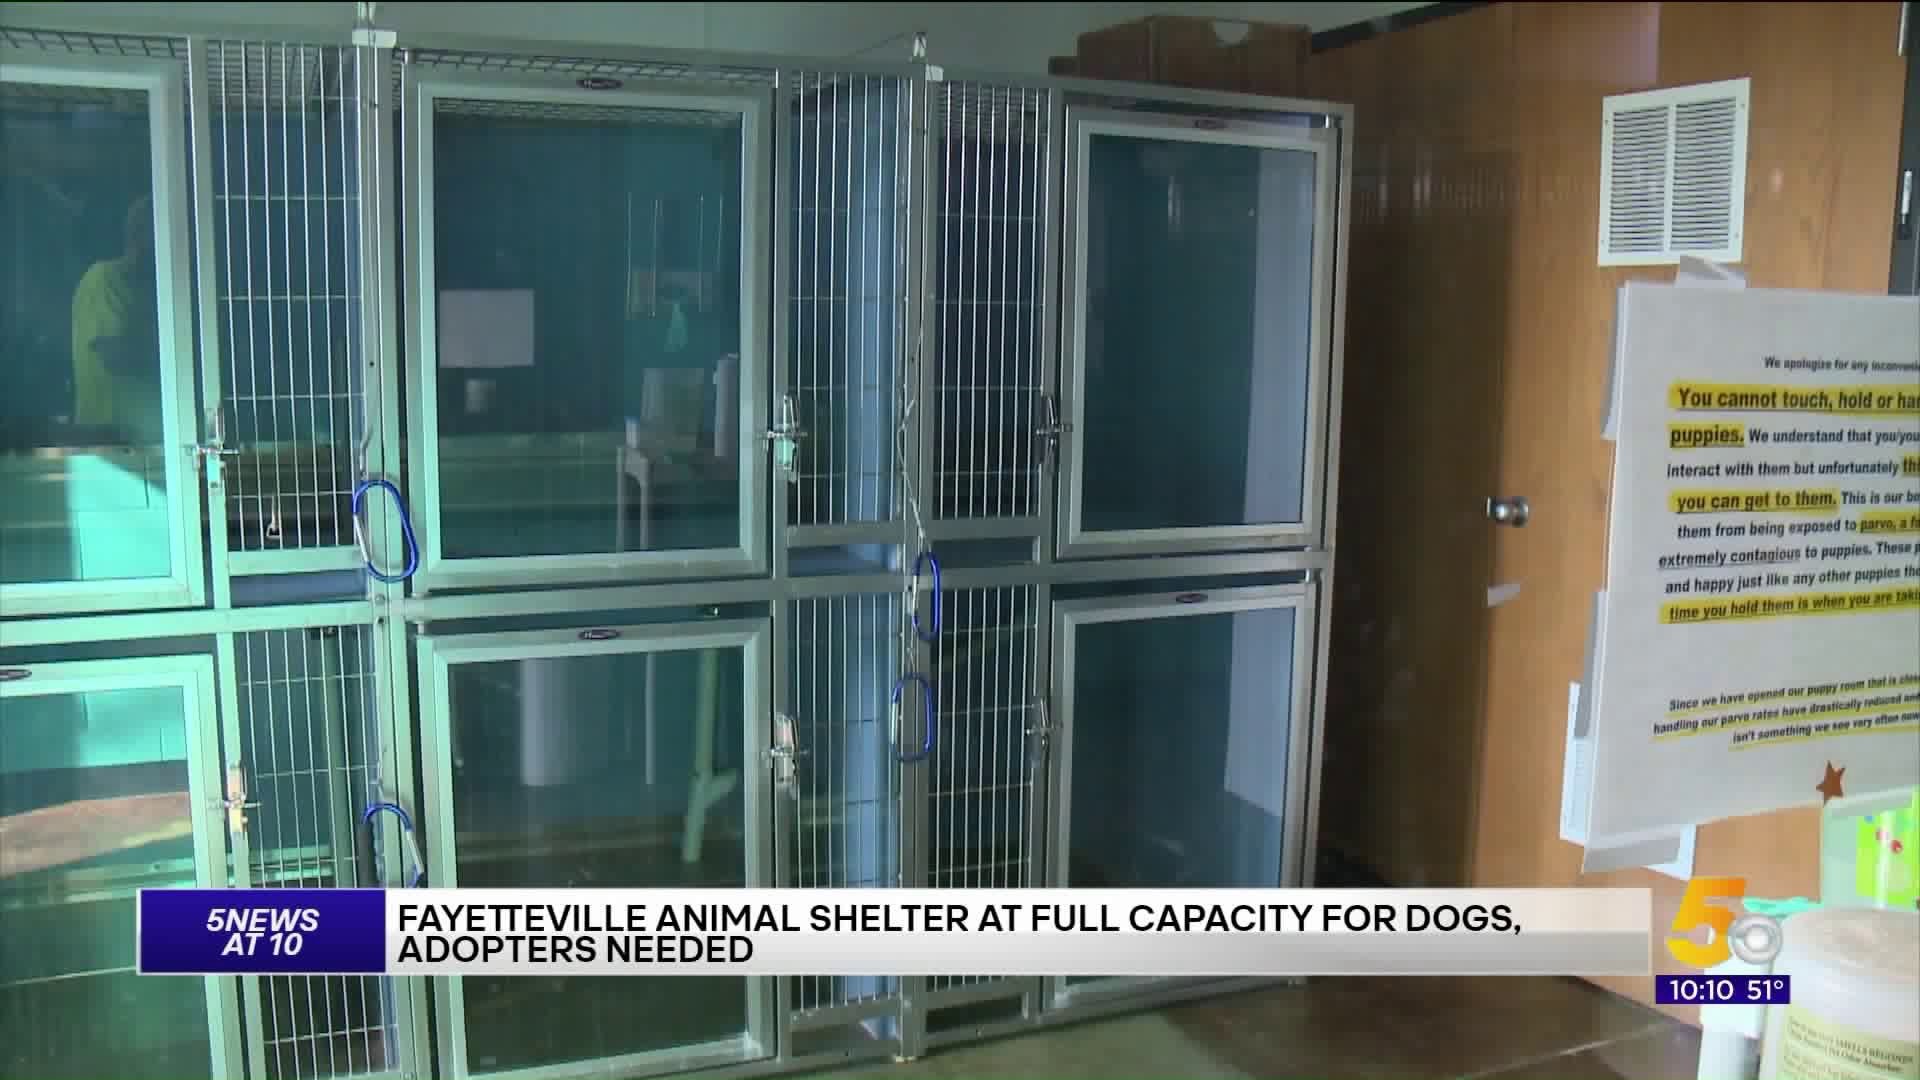 Fayetteville Animal Shelter Dog Room At Full Capacity, Adopters Needed